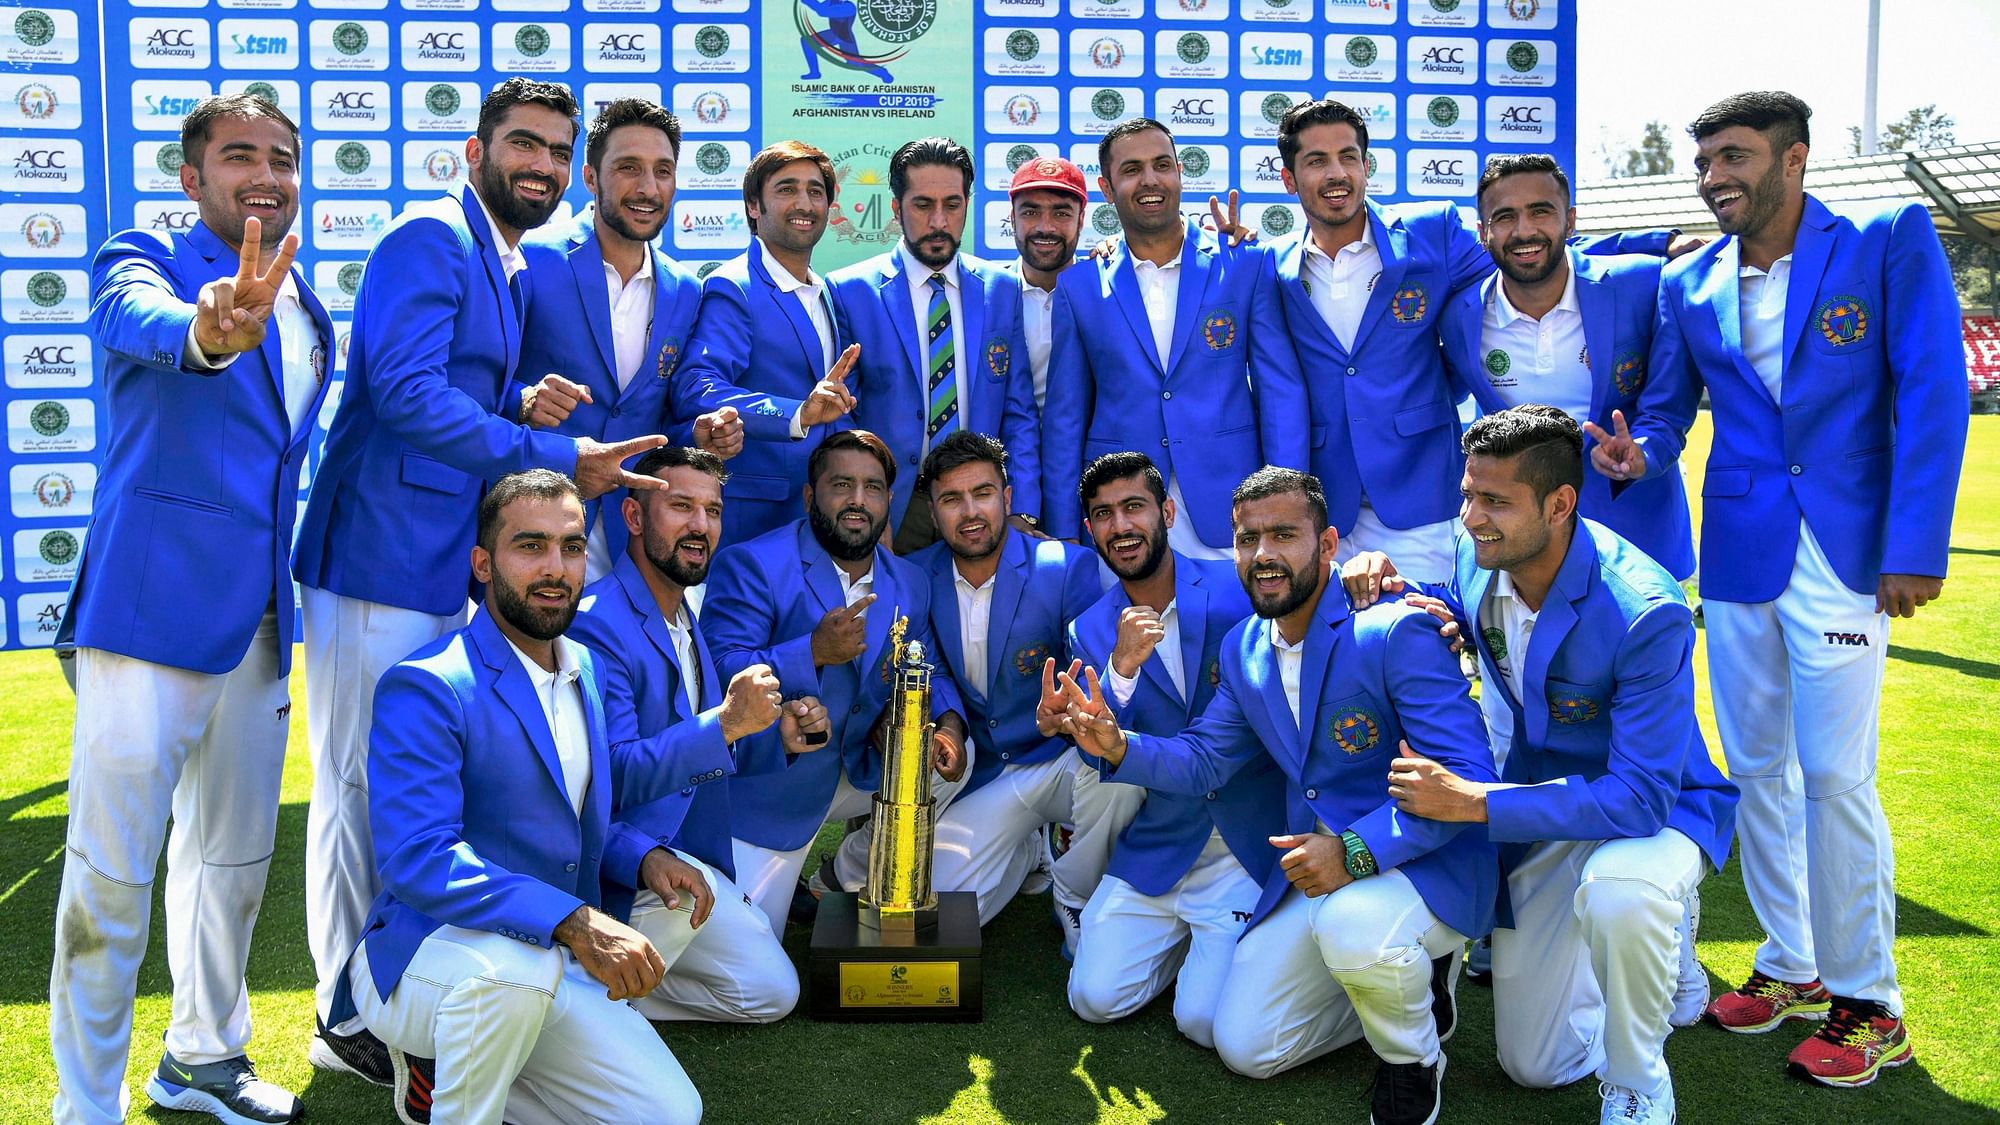 Dehradun: Afghanistan cricket team members pose with the winning trophy after their first Test win beating Ireland by seven wickets.